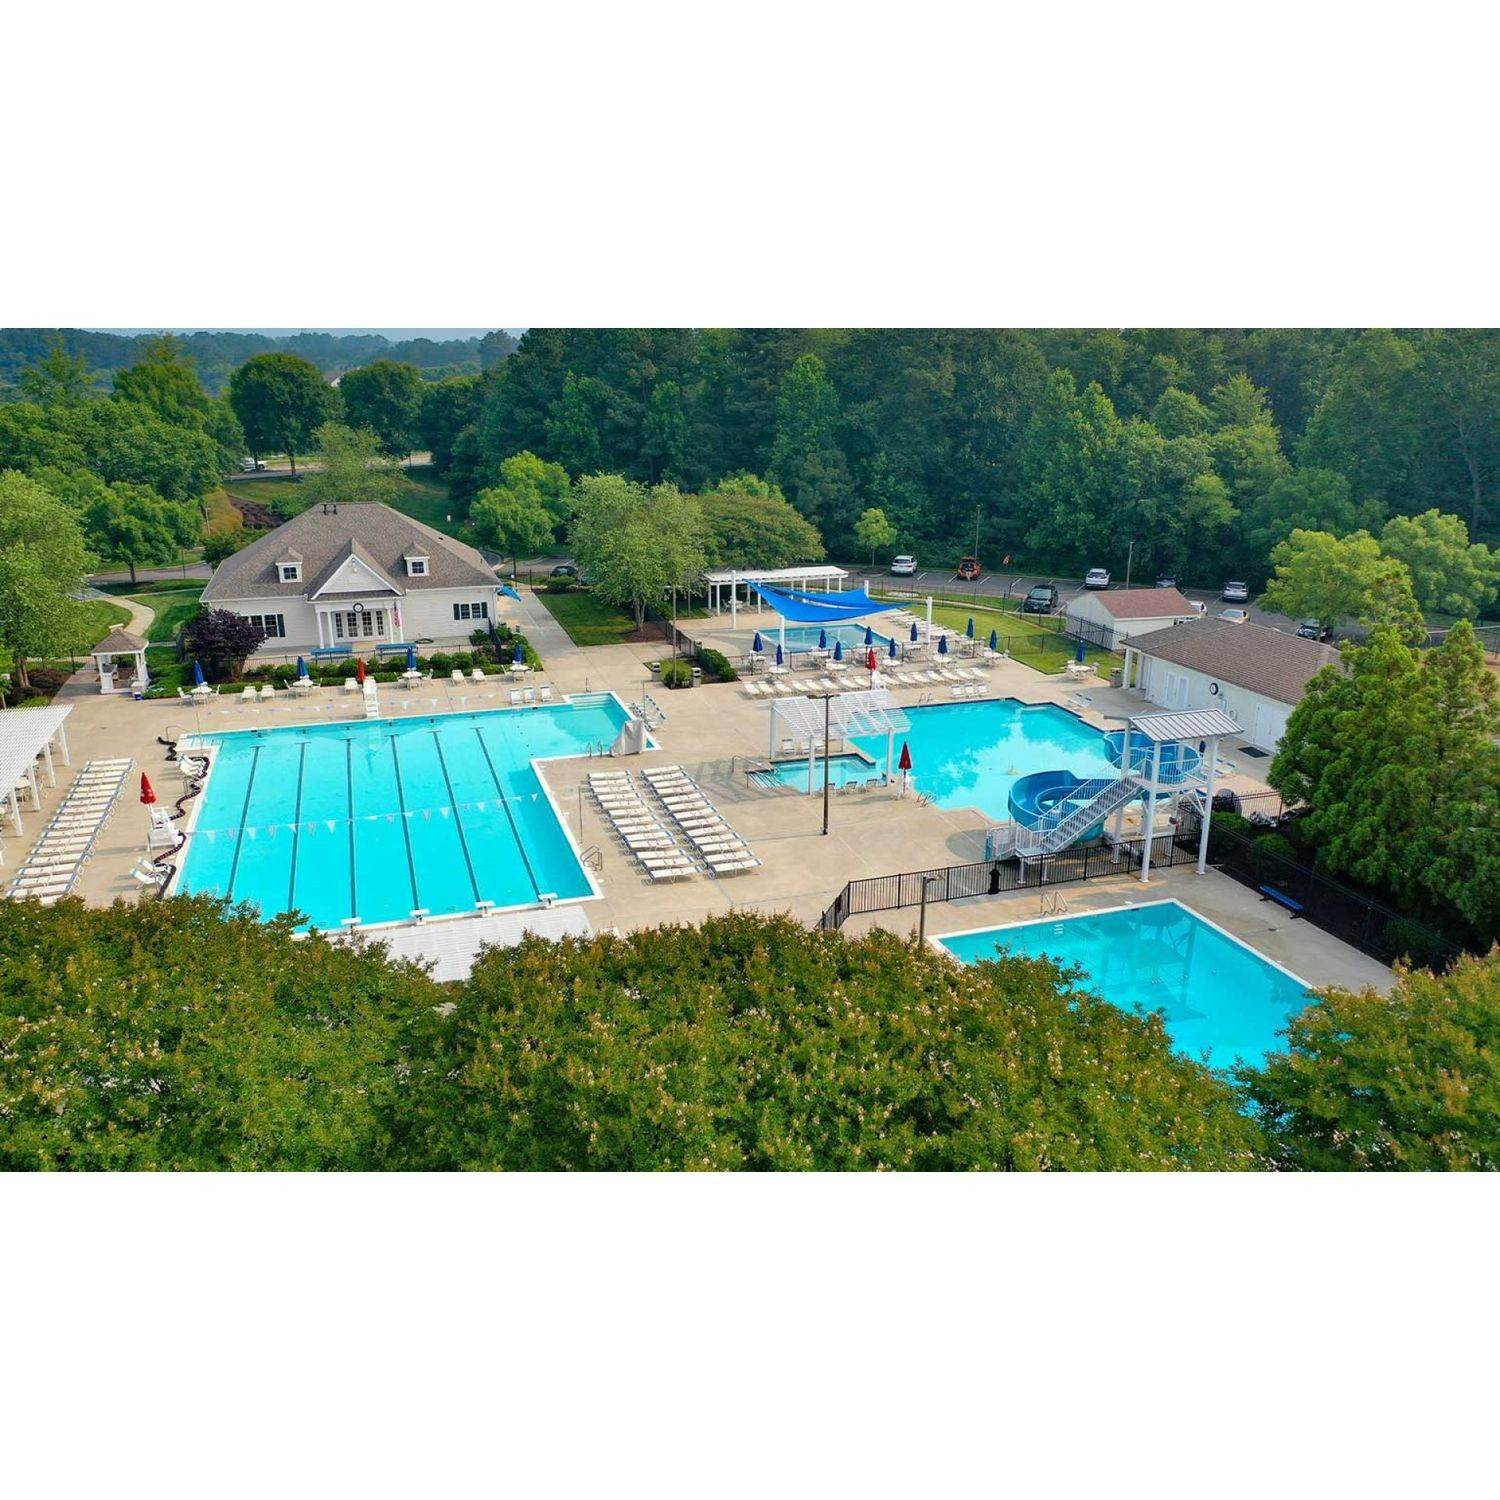 3. The Pointe at Twin Hickory建於 4605 Pouncey Tract Road, Glen Allen, VA 23059